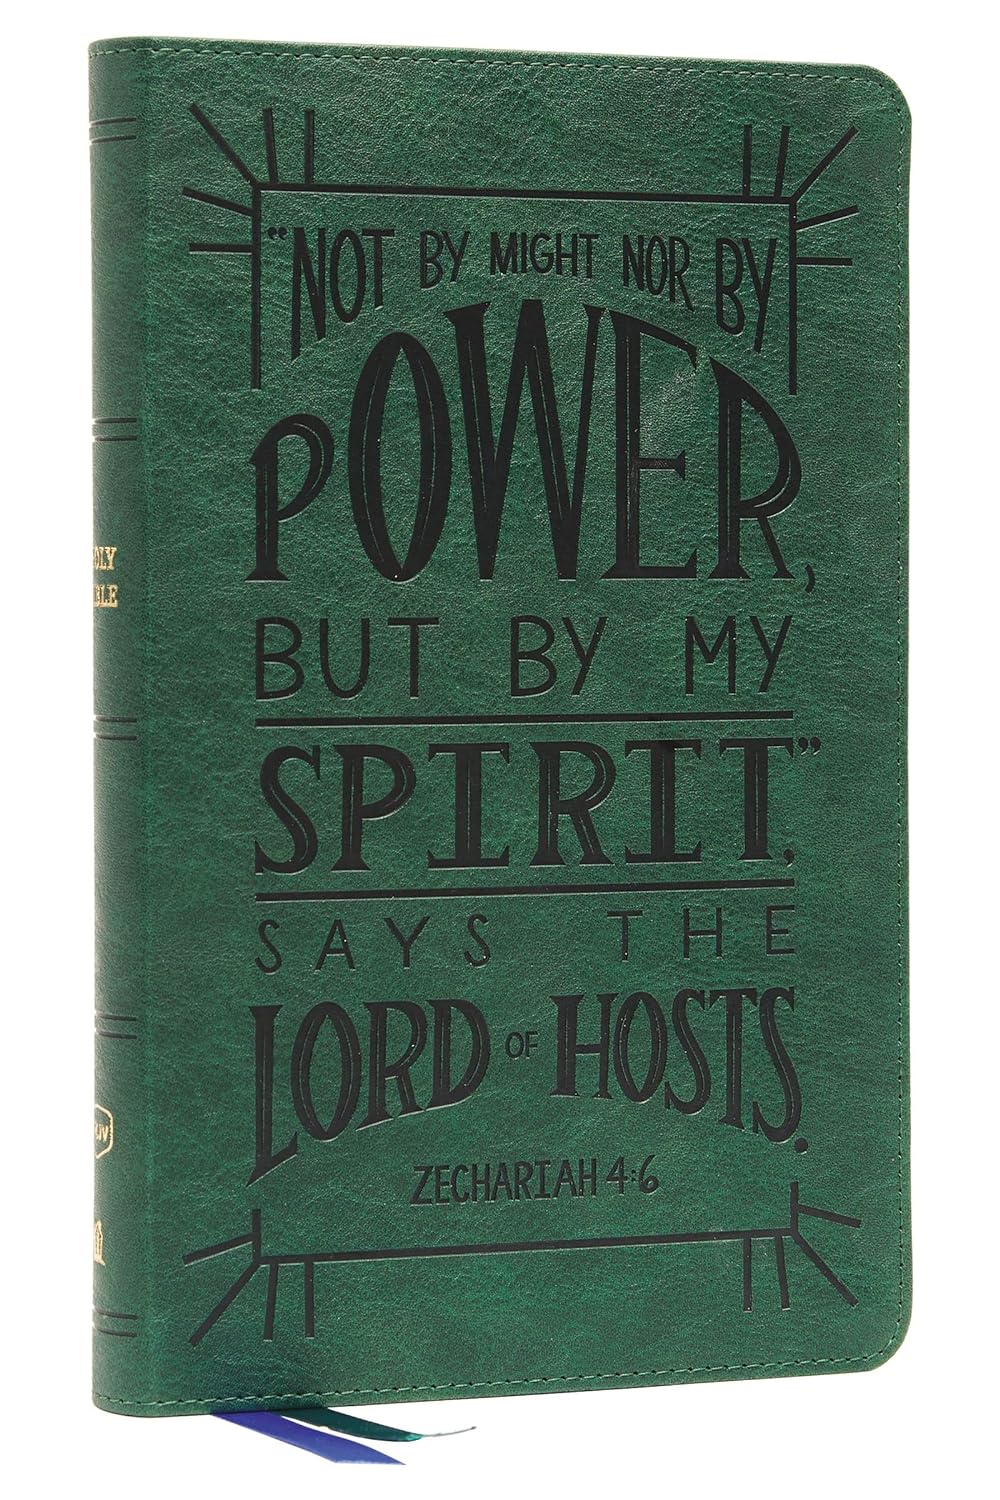 NKJV Verse Art Cover Thinline Youth Edition, Green Leather Soft